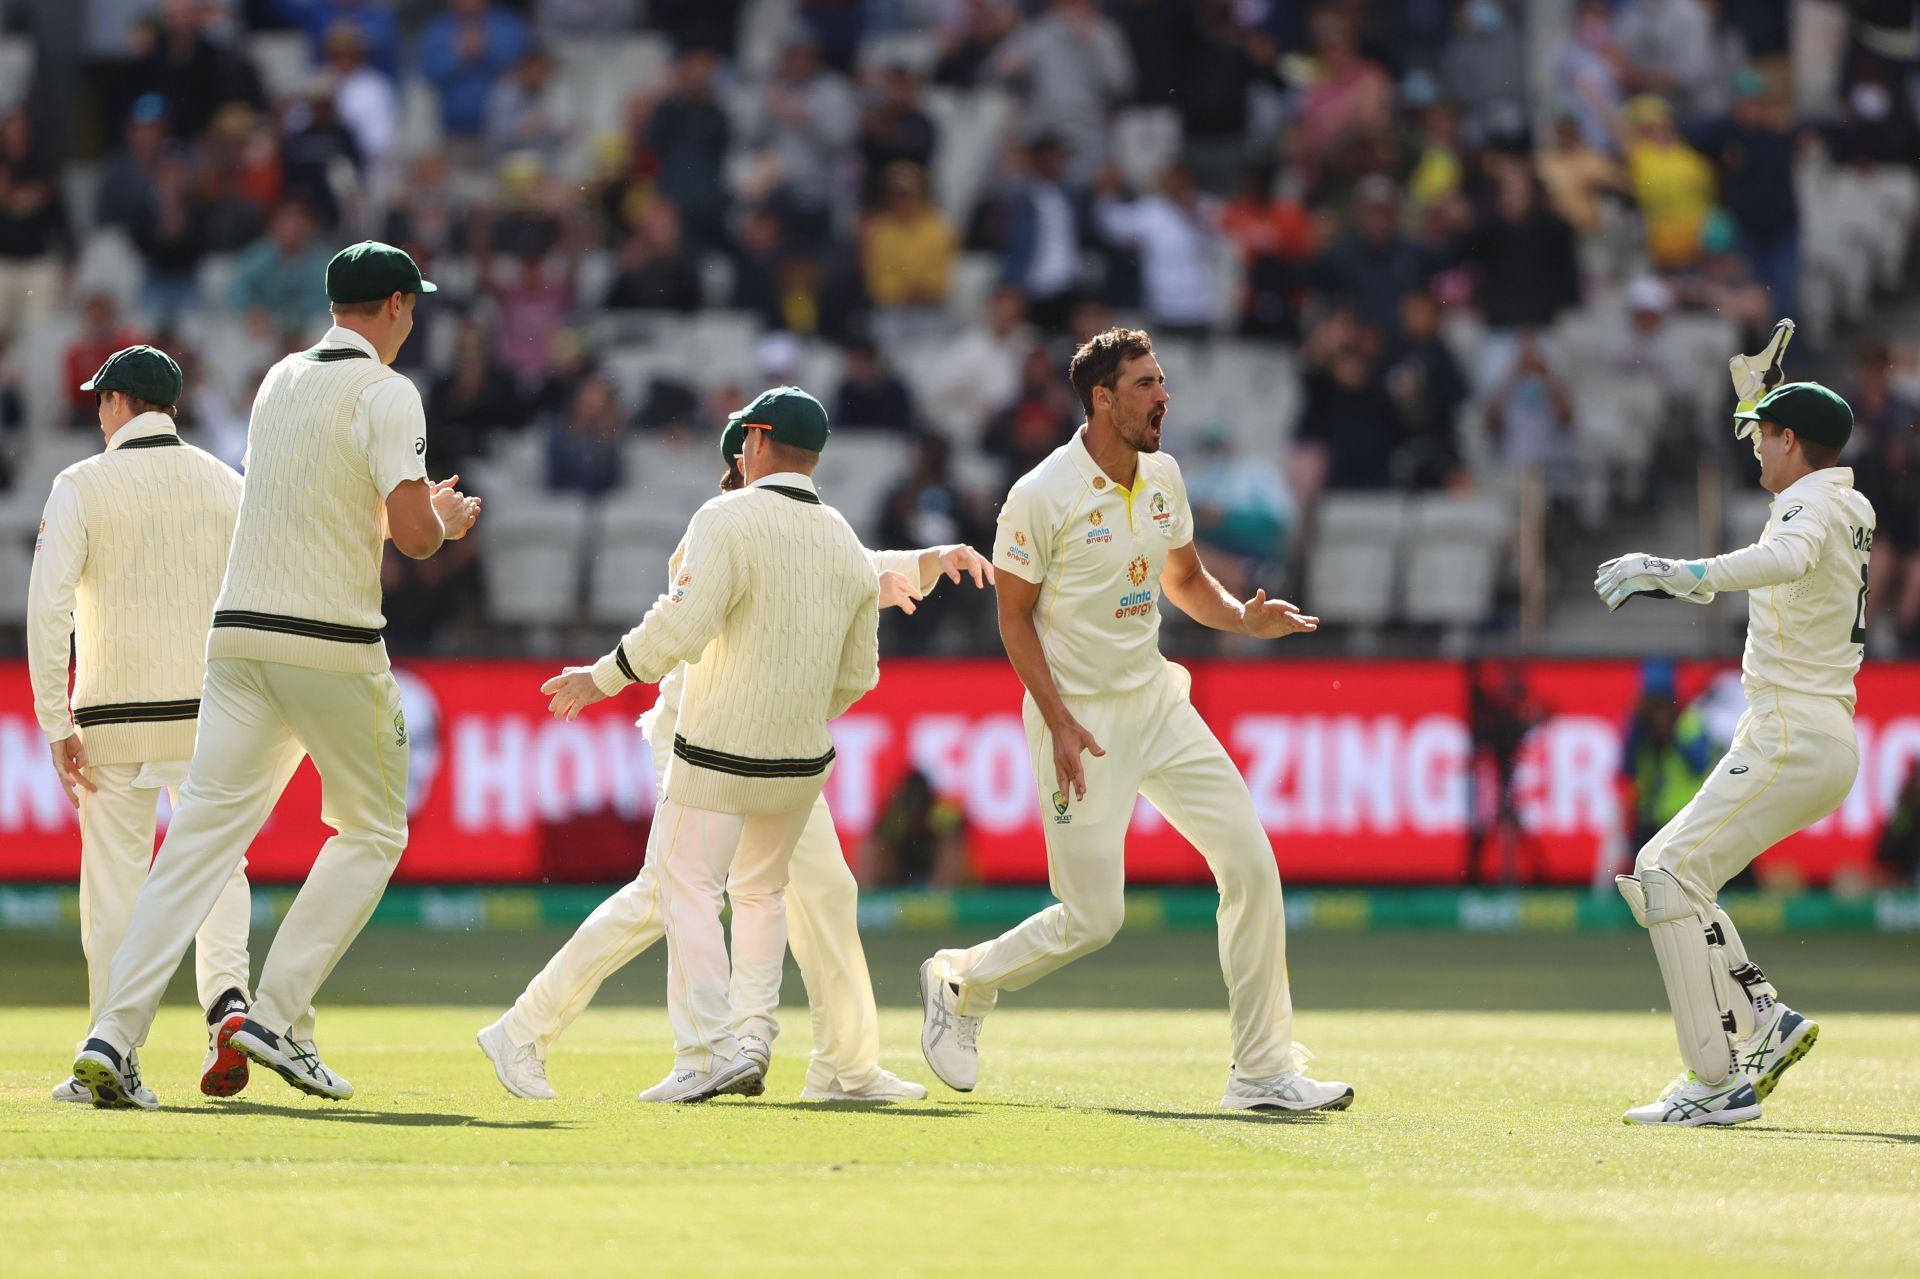 Mitchell Starc celebrates with teammates after dismissing Dawid Malan. Pic: Getty Images